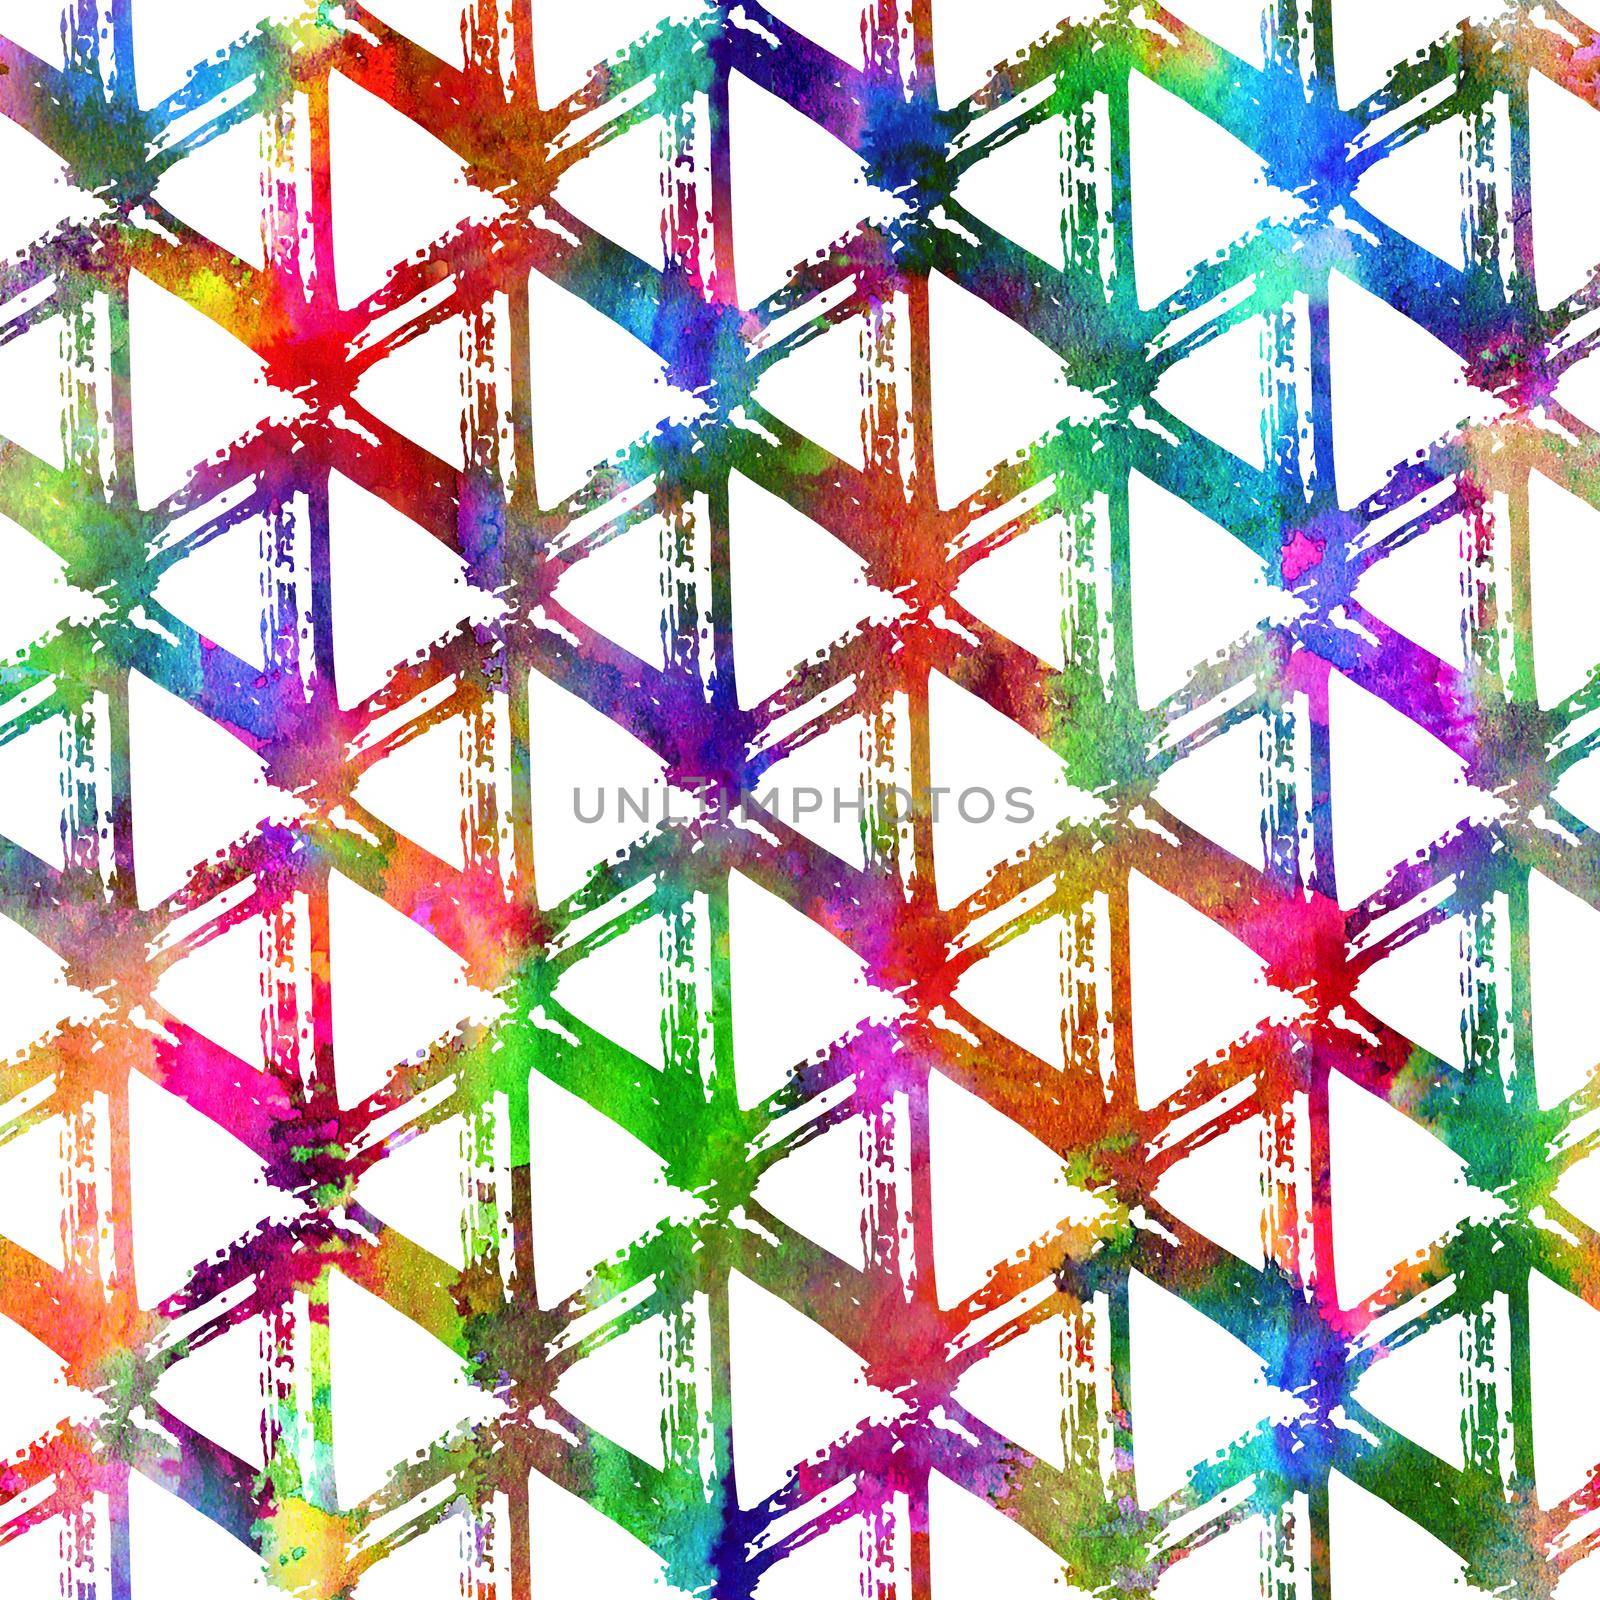 Brush Stroke Geometric Grung Pattern Seamless in Rainbow Color Background. Gunge Collage Watercolor Texture for Teen and School Kids Fabric Prints Grange Design with line.